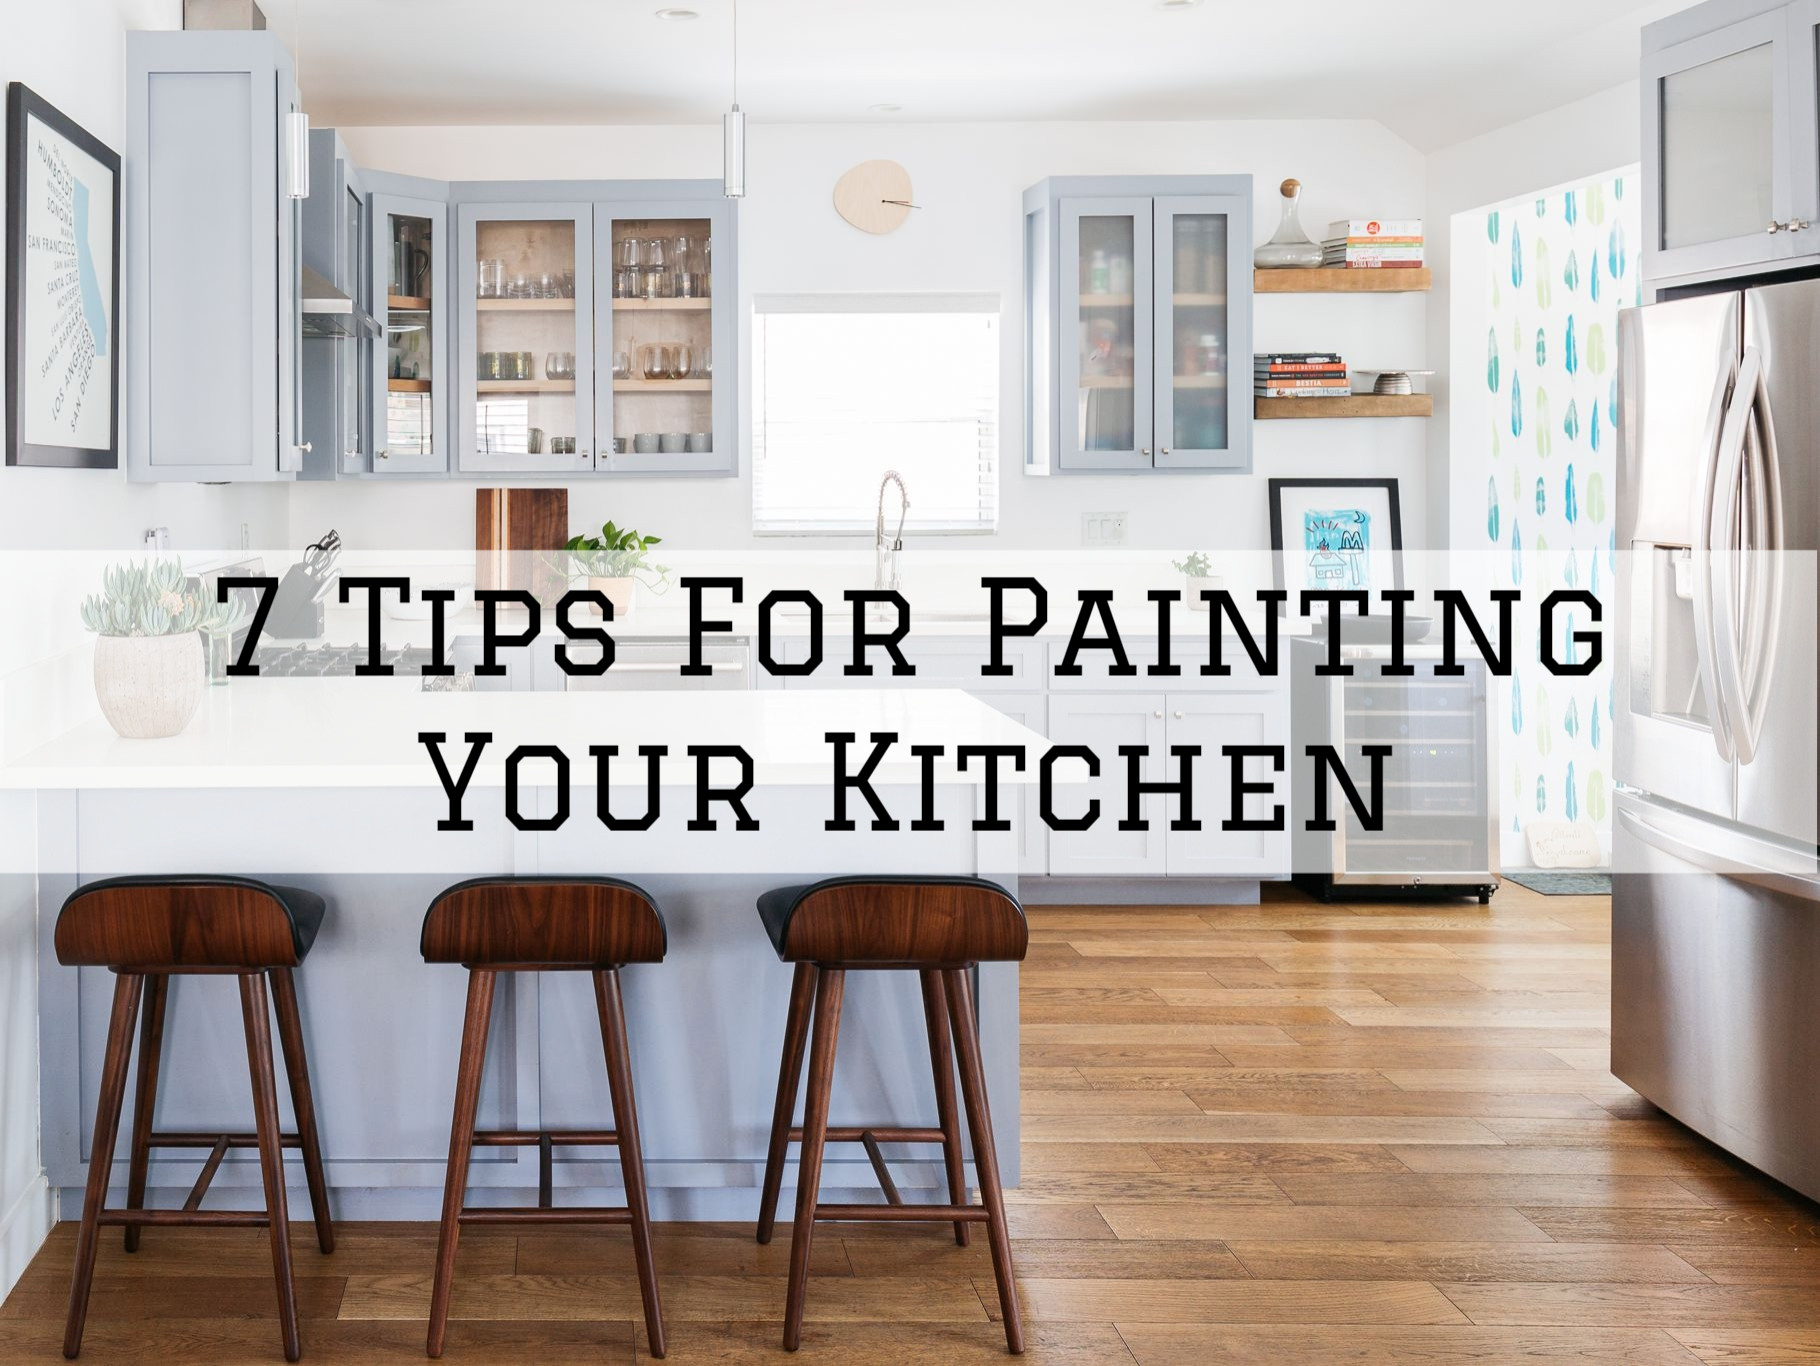 21-08-2021 Steves Quality Painting And Washing Princeton WI tips for painting your kitchen